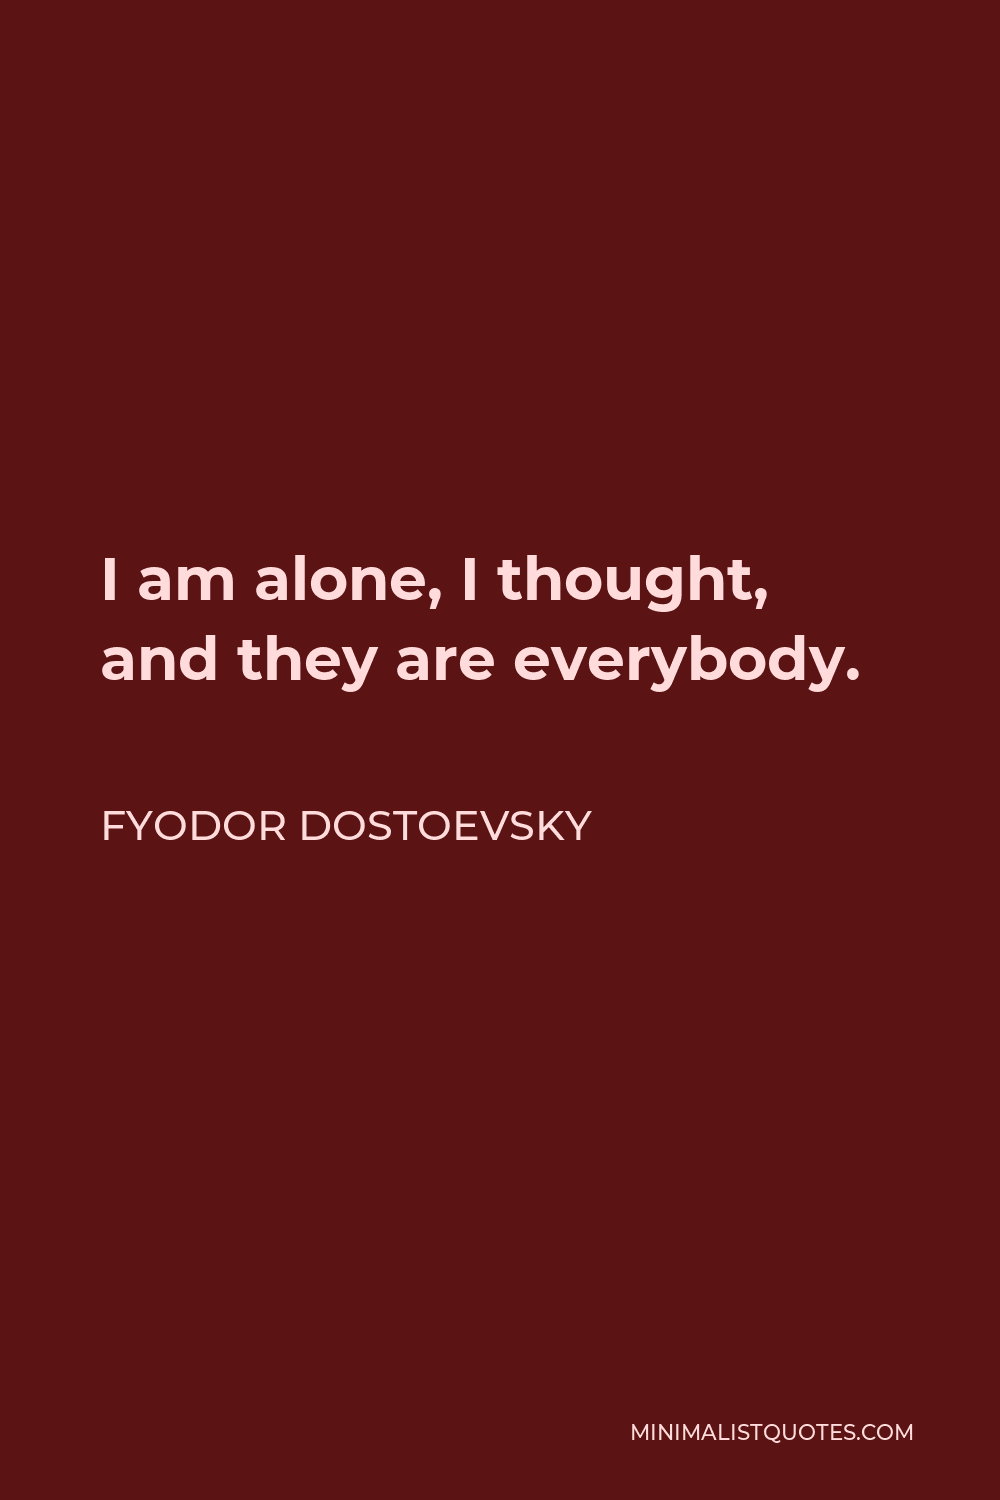 Fyodor Dostoevsky Quote: I am alone, I thought, and they are ...